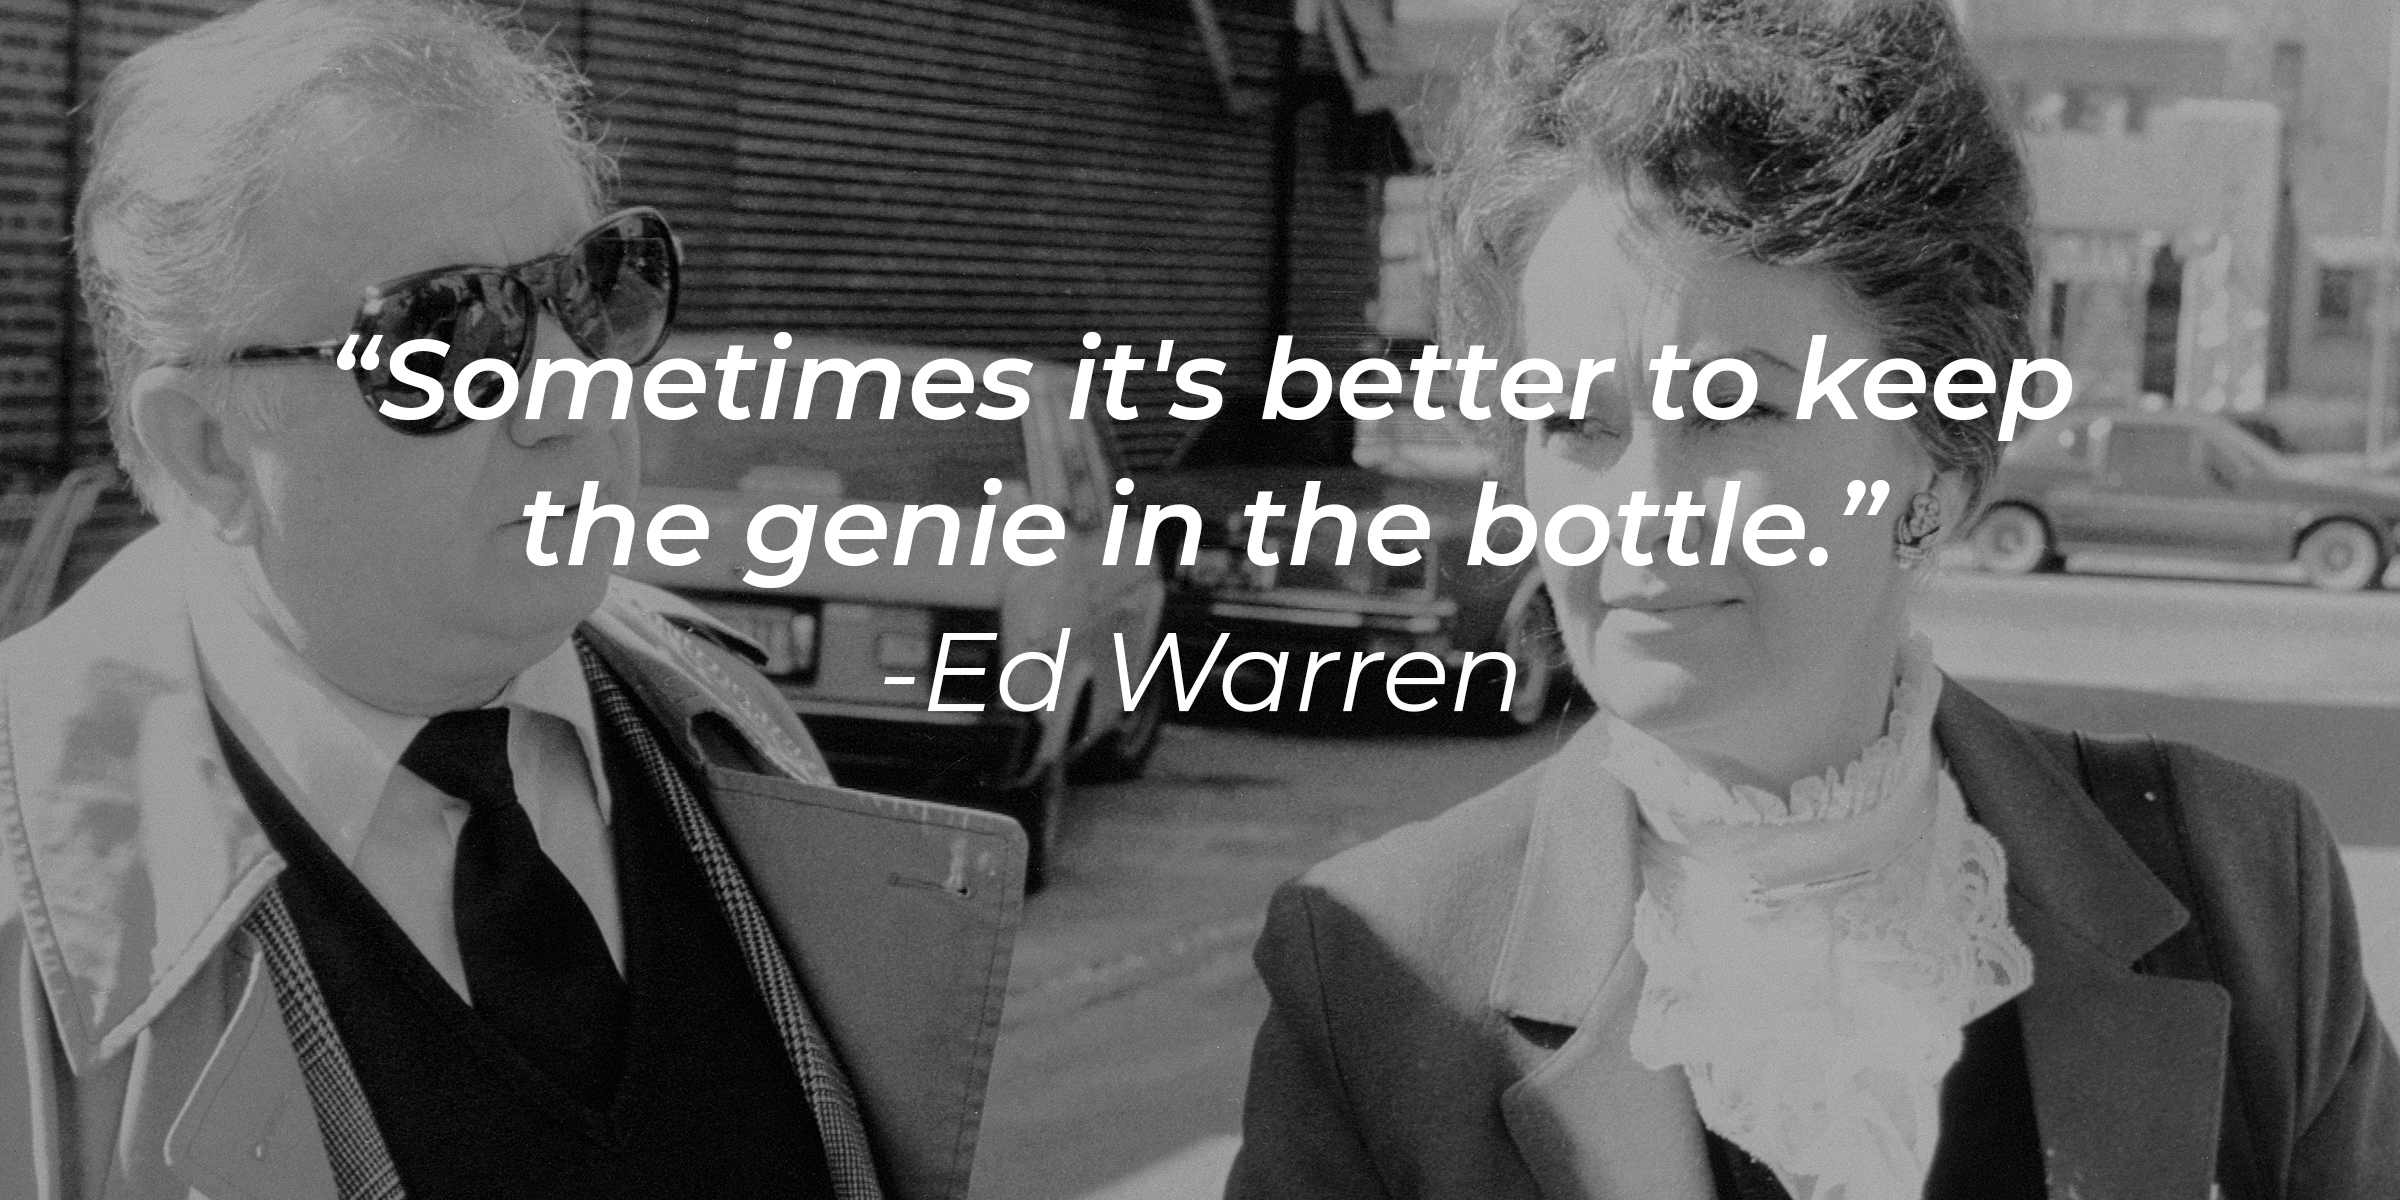 Ed and Lorraine Warren with a quote from Ed’s character portrayal: “Sometimes it's better to keep the genie in the bottle.” | Source: Getty Images